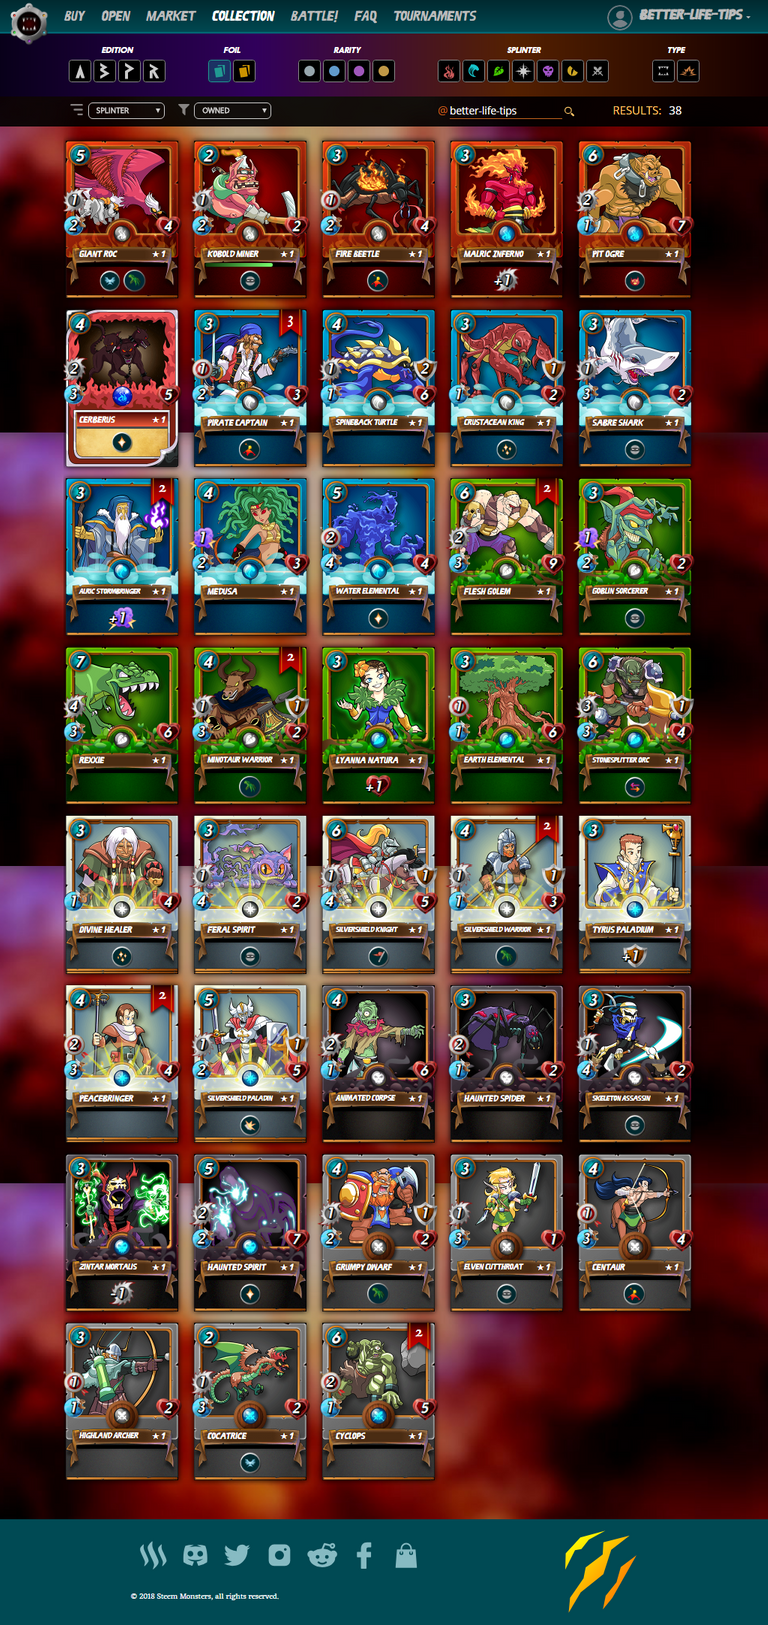 FireShot Capture 120 - Steem Monsters - Collect, Trade, Battle! - steemmonsters.com.png